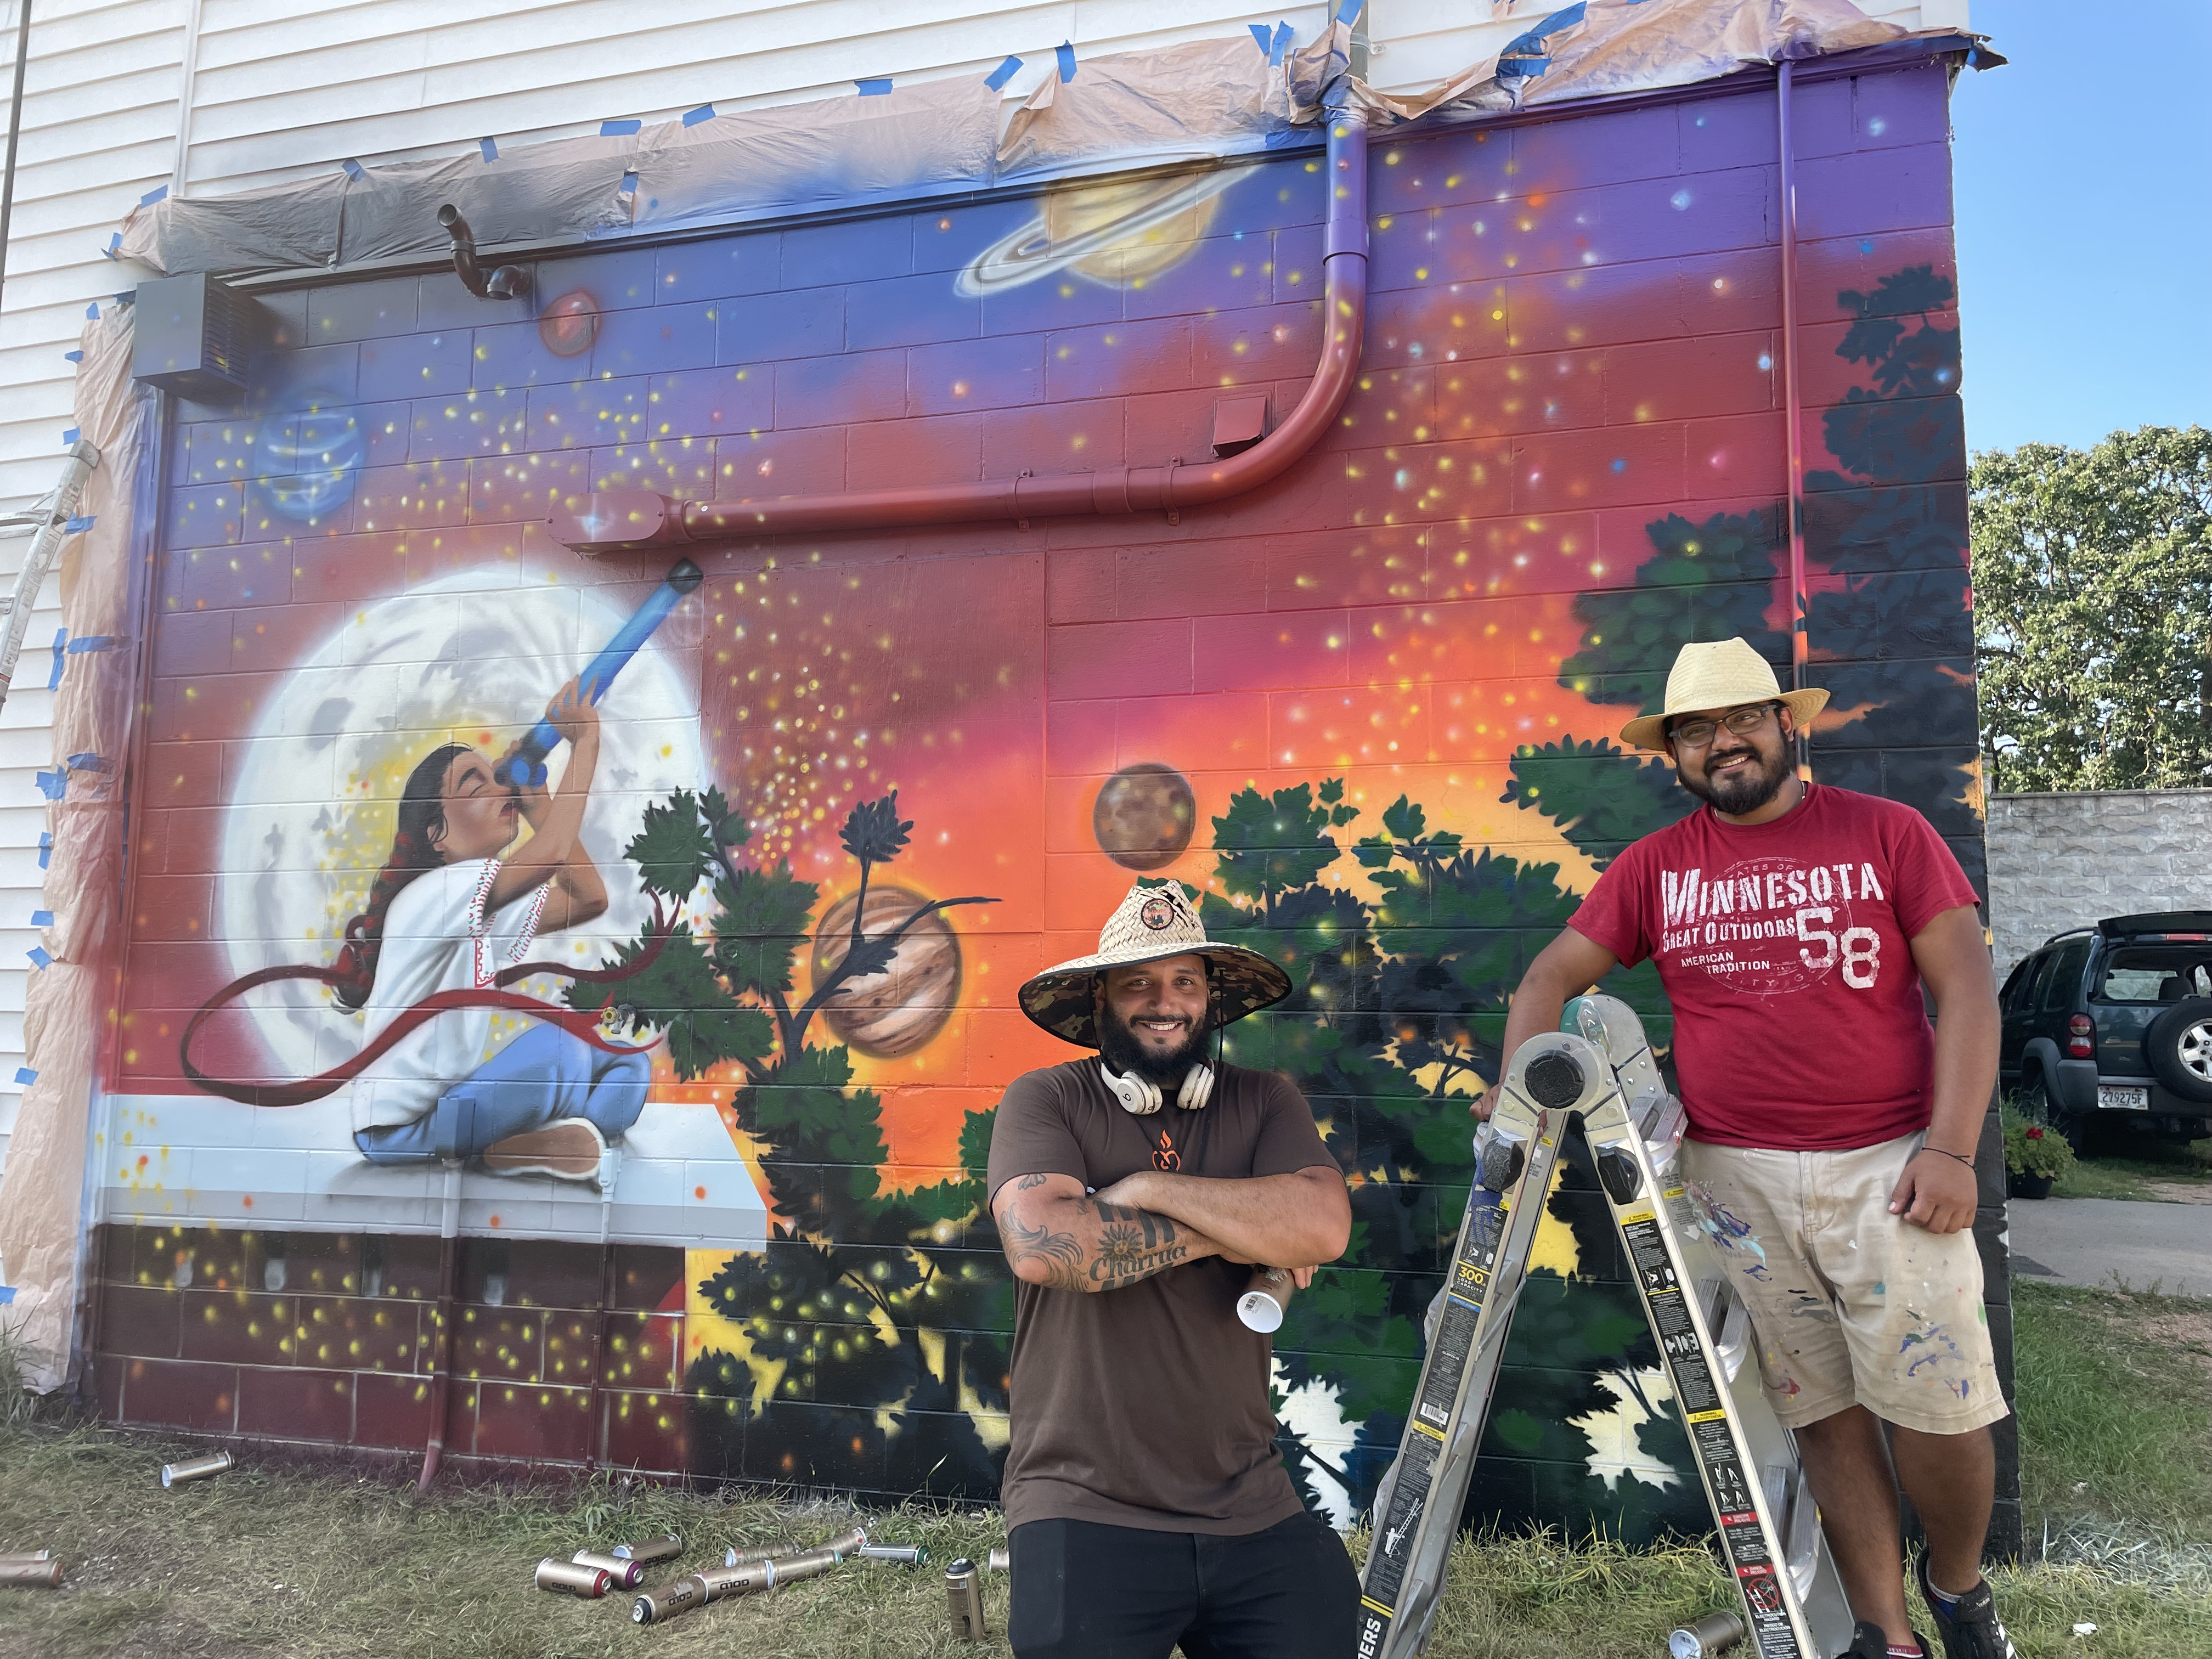 Two people wearing sunhats pose in front of a colorful mural on a brick wall. The mural depicts a young person sitting on a roof, holding a telescope up to a starry sky, with the moon big behind them and planets off in the distance.